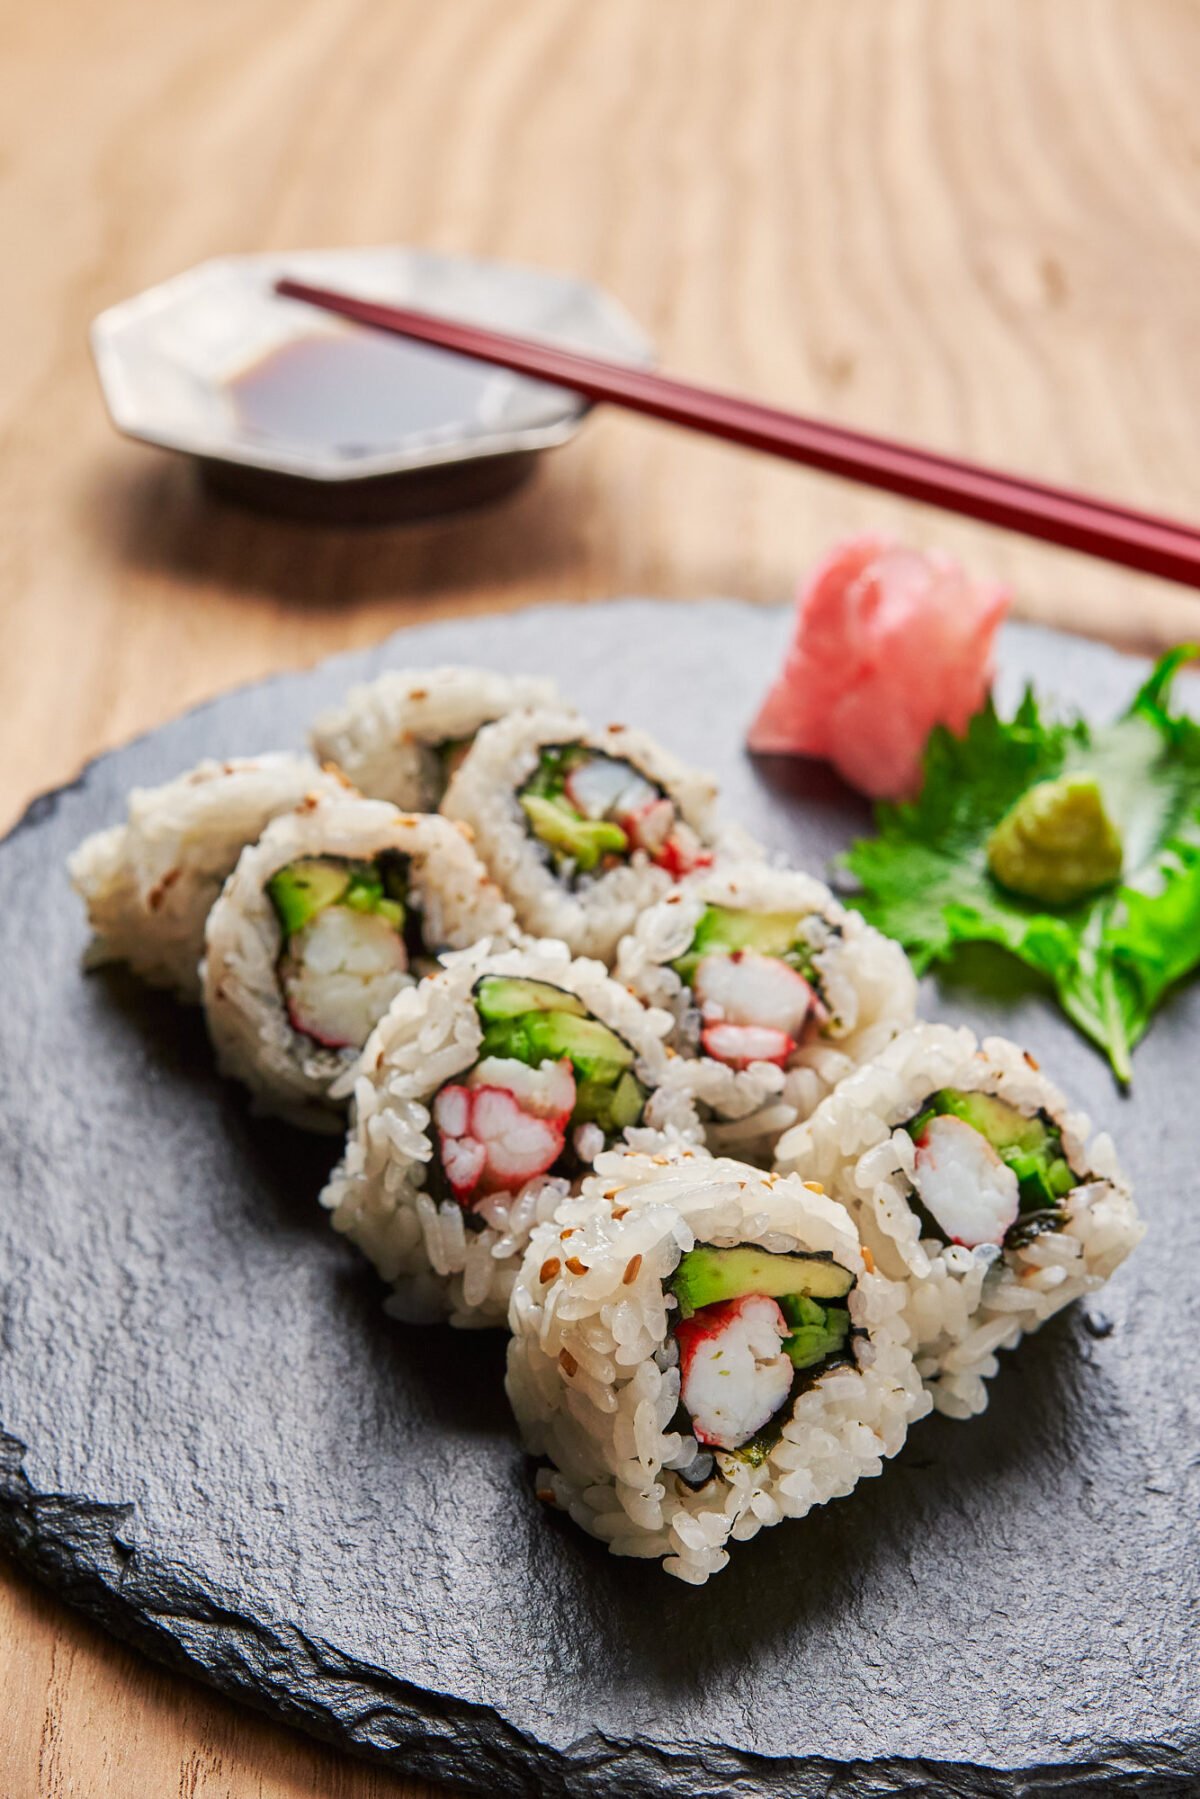 Here's how to make California Rolls at home like a pro. All the techniques you need to make the rice and roll the roll.